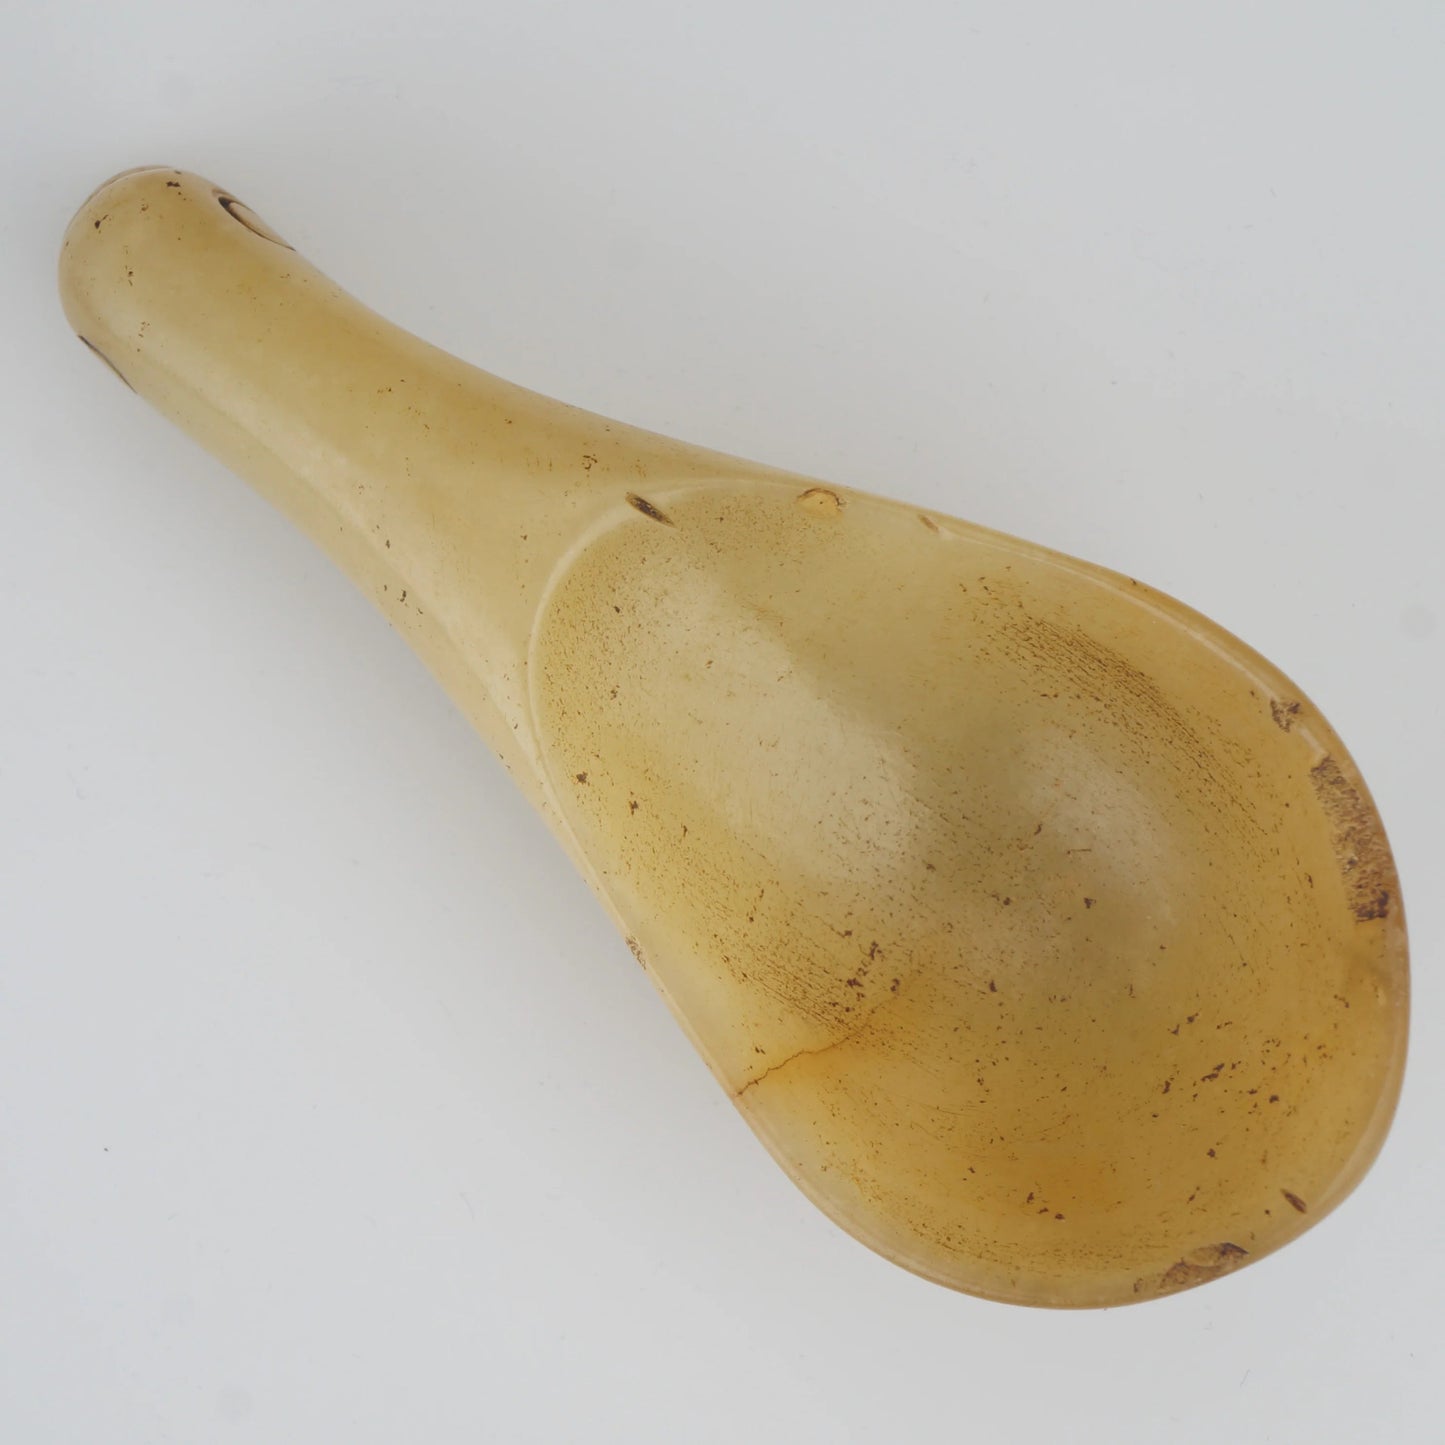 Vintage Chinese Archaic-style Yellow Jade Spoon with Gooseneck Handle - Bear and Raven Antiques